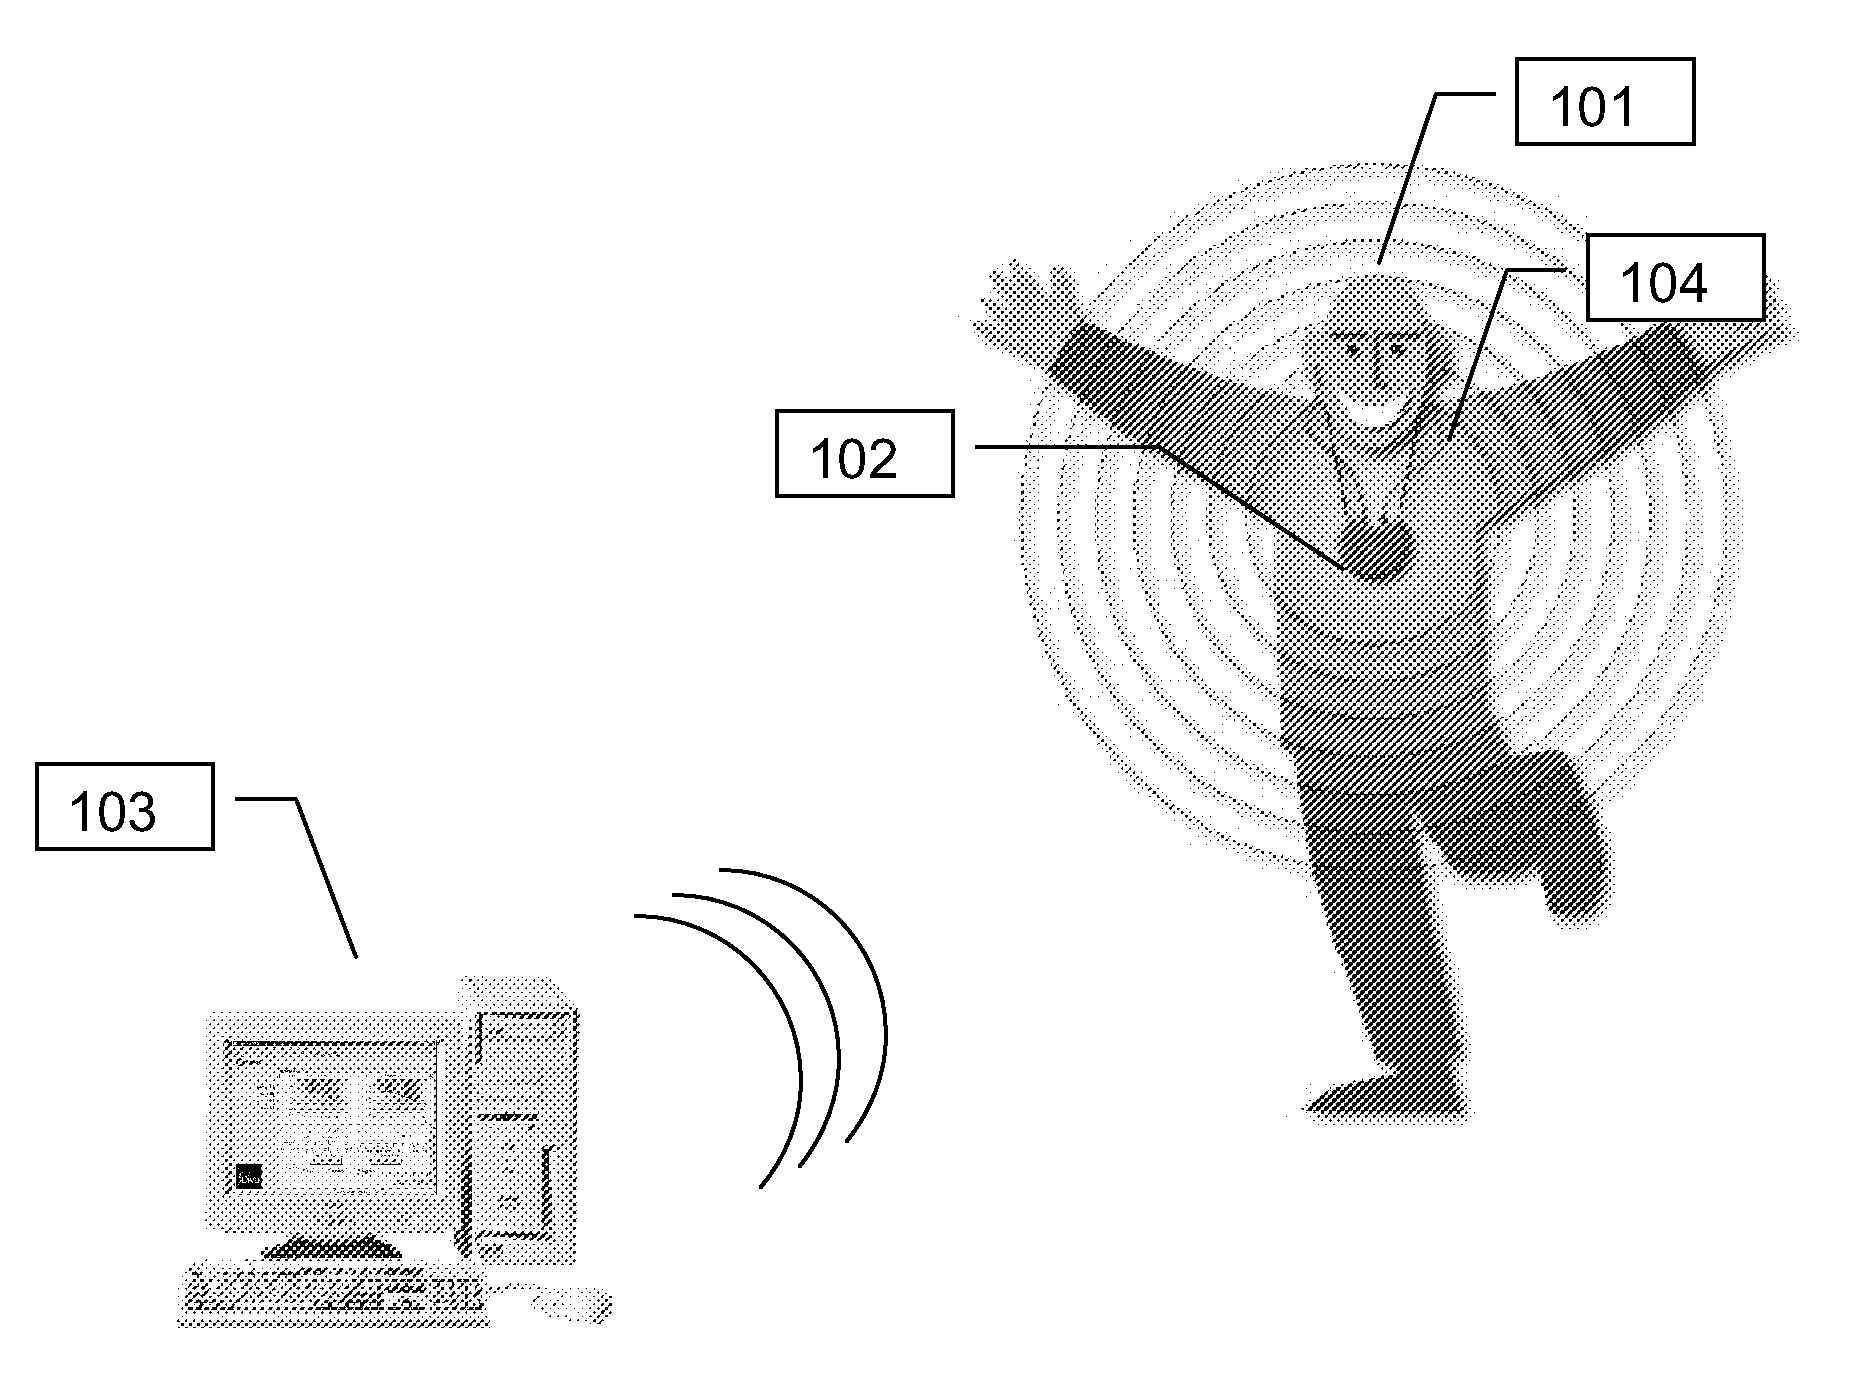 Method and system for surveillance of a wireless connection in a hearing aid fitting system